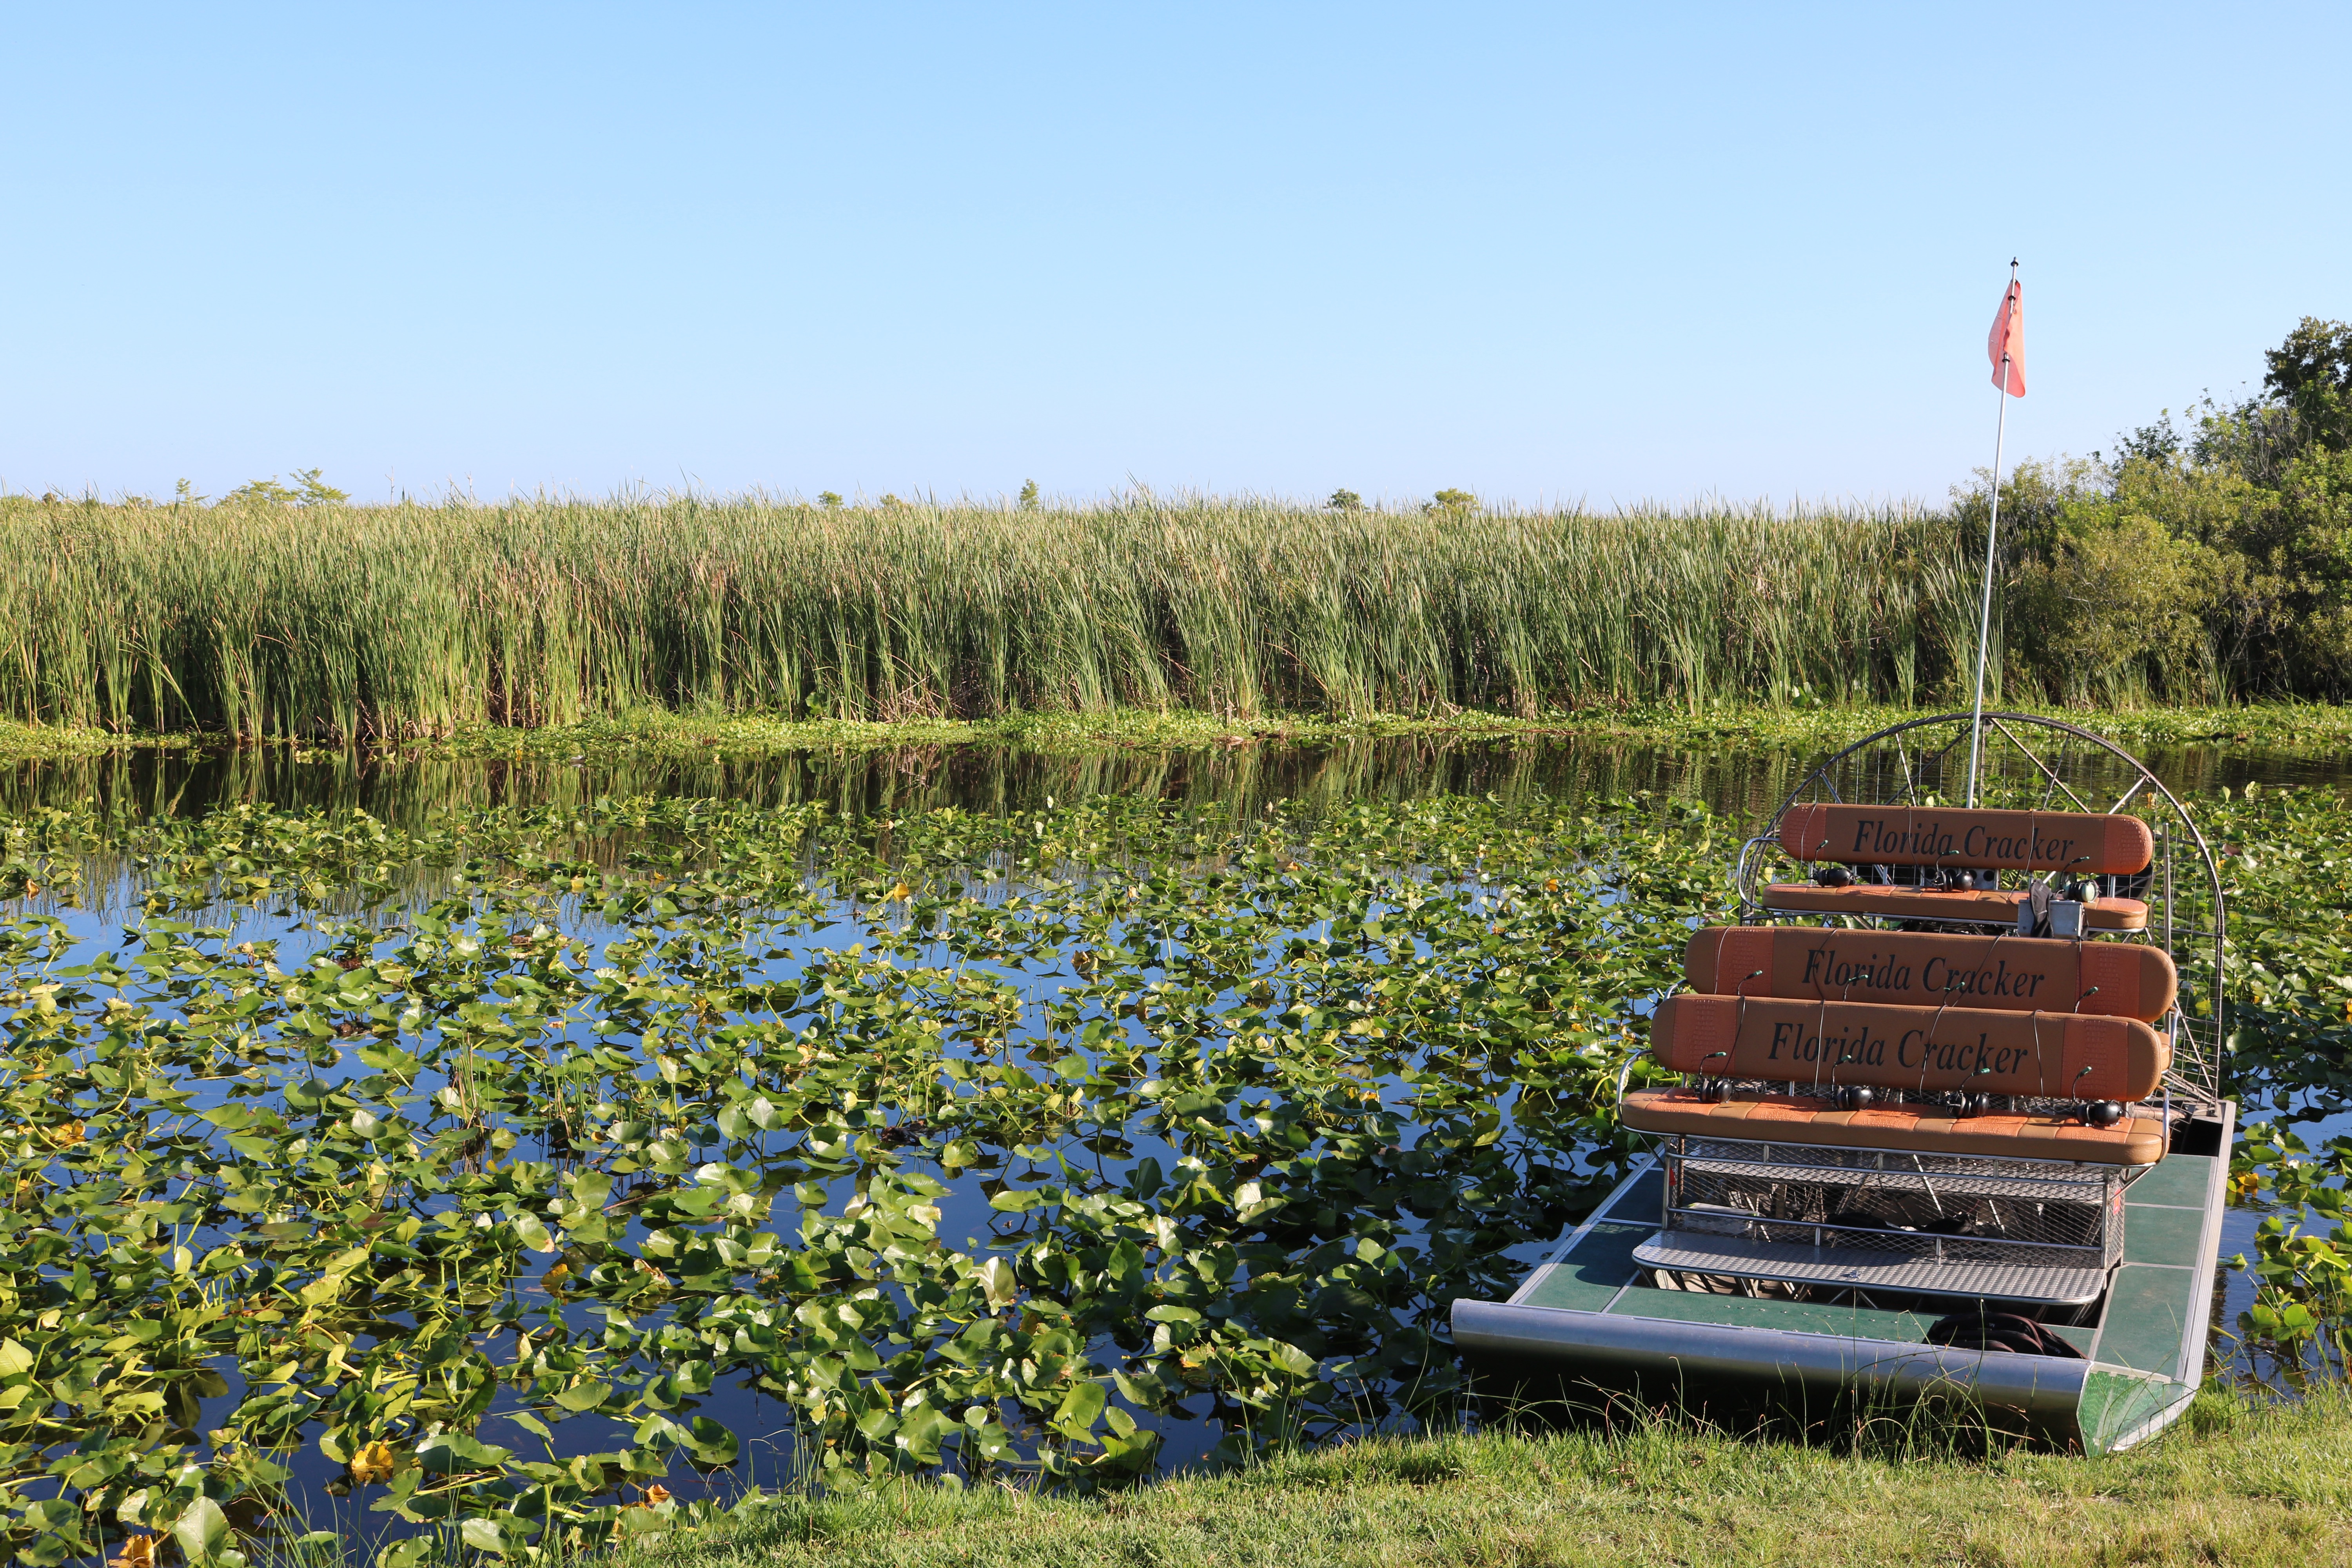 What to Expect on an Airboat Ride